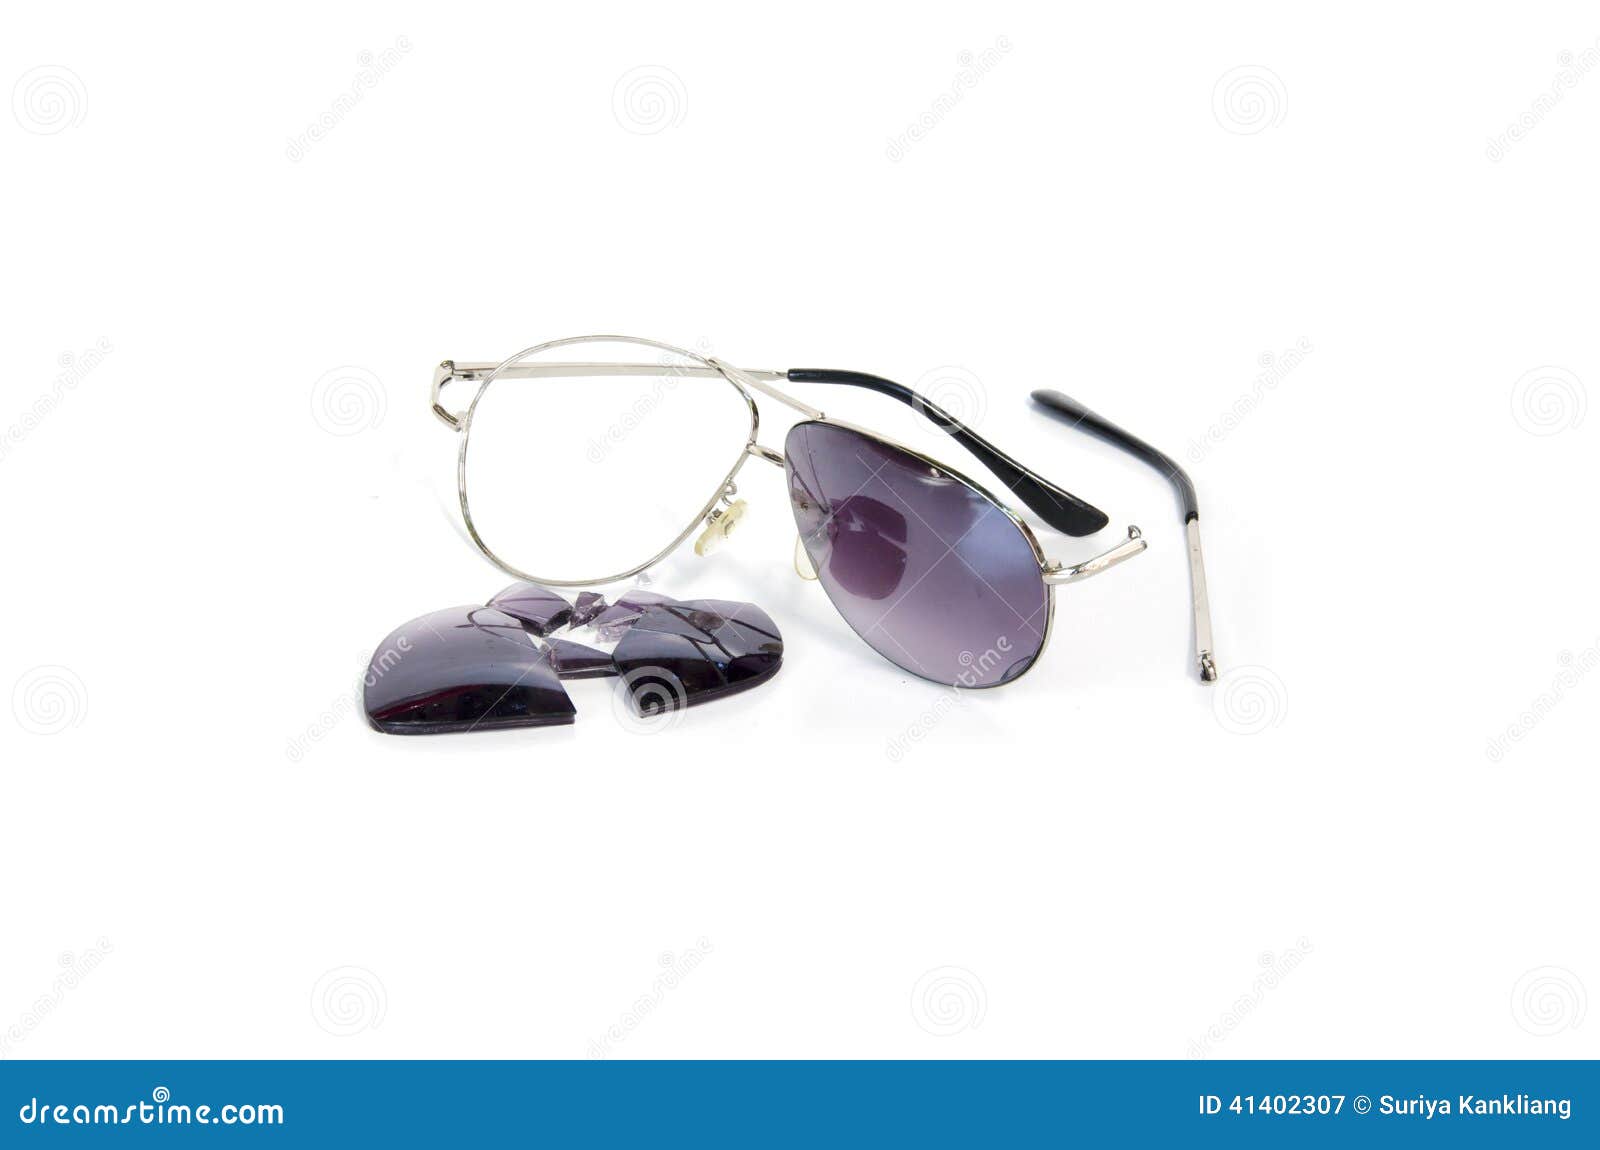 A broken sun glass stock image. Image of accident, road - 41402307